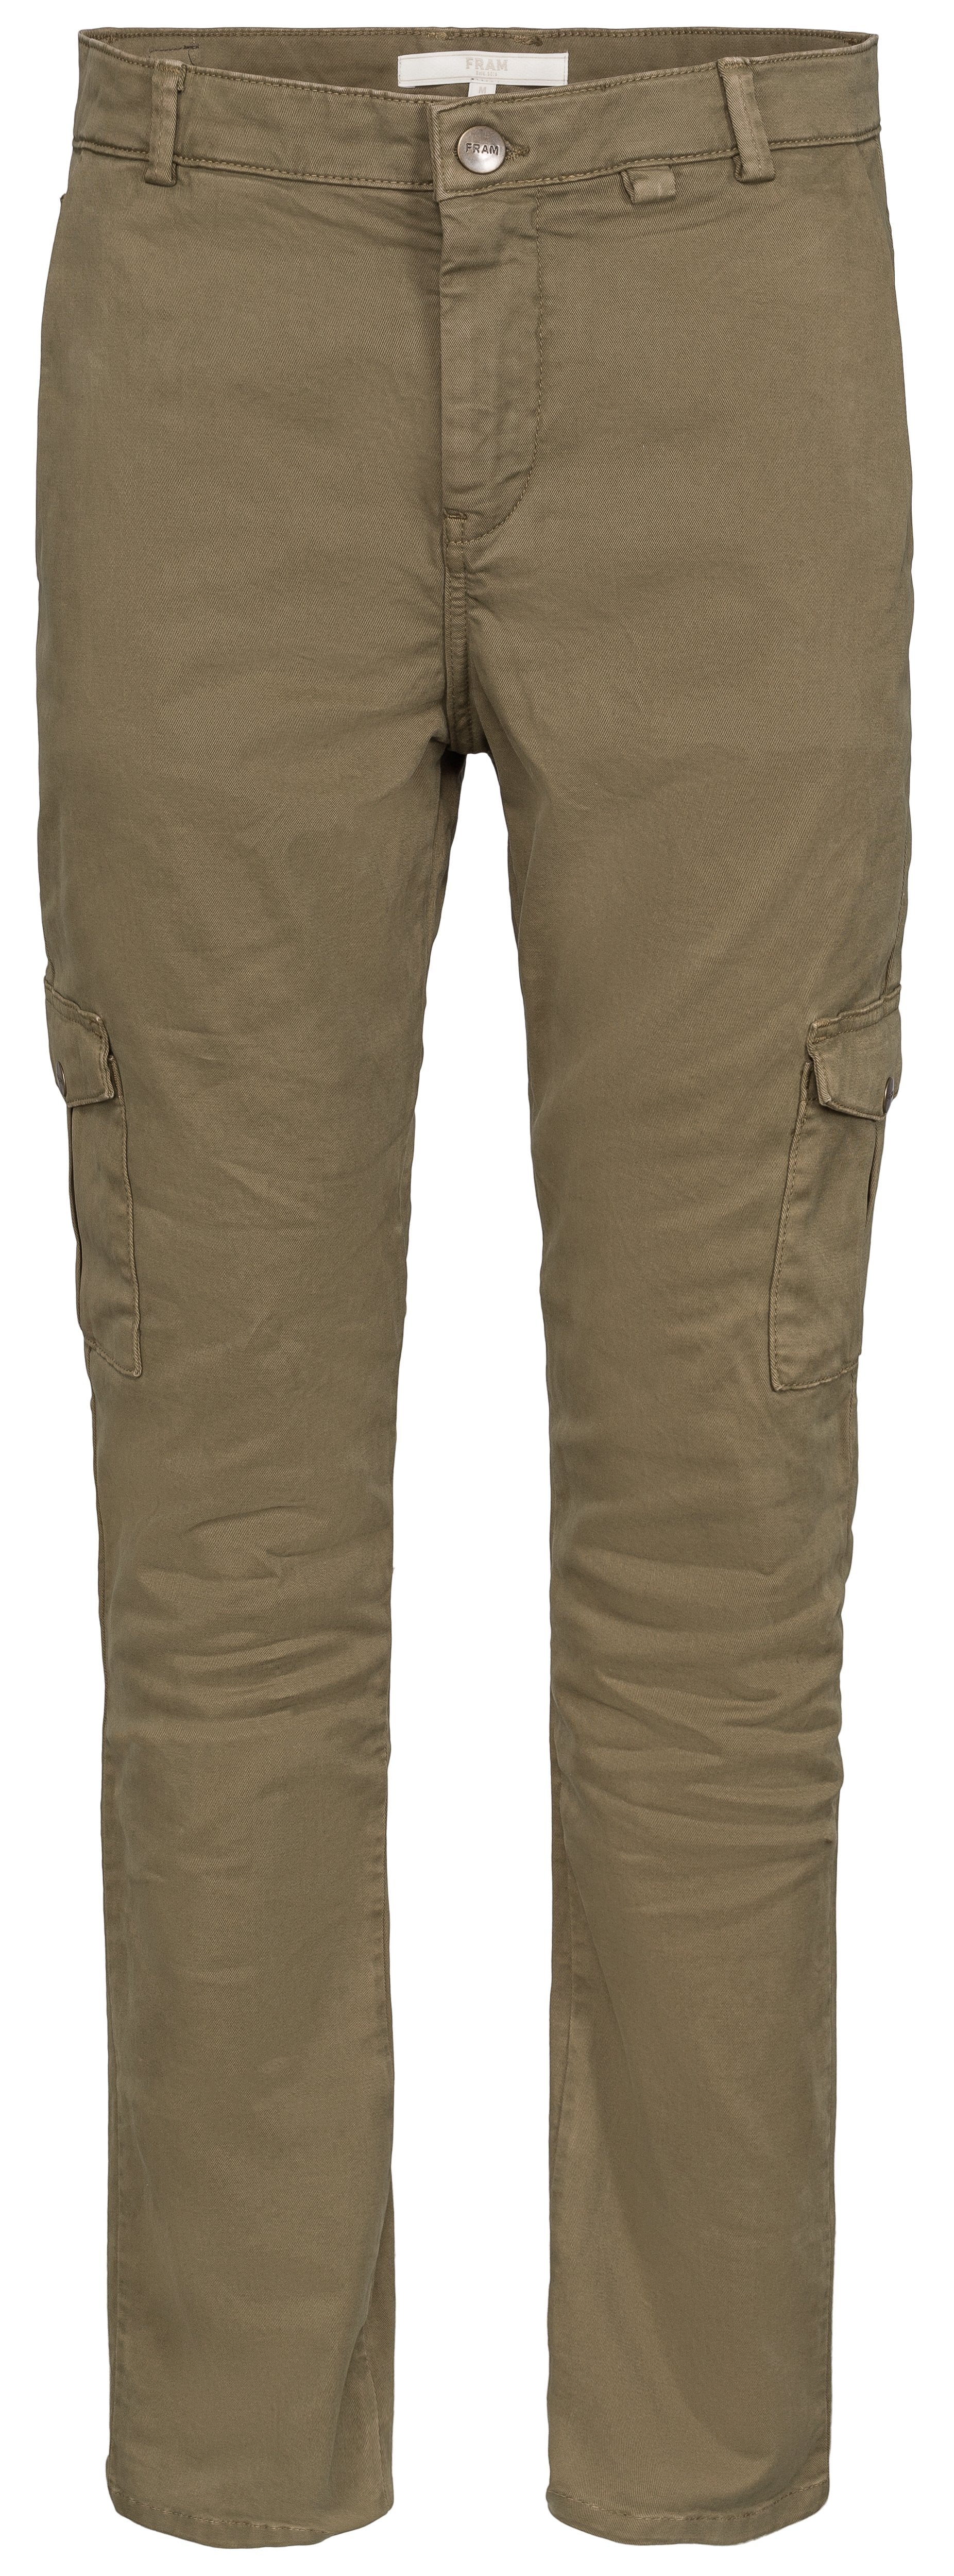 Parcel Cargo Chino - Military Olive